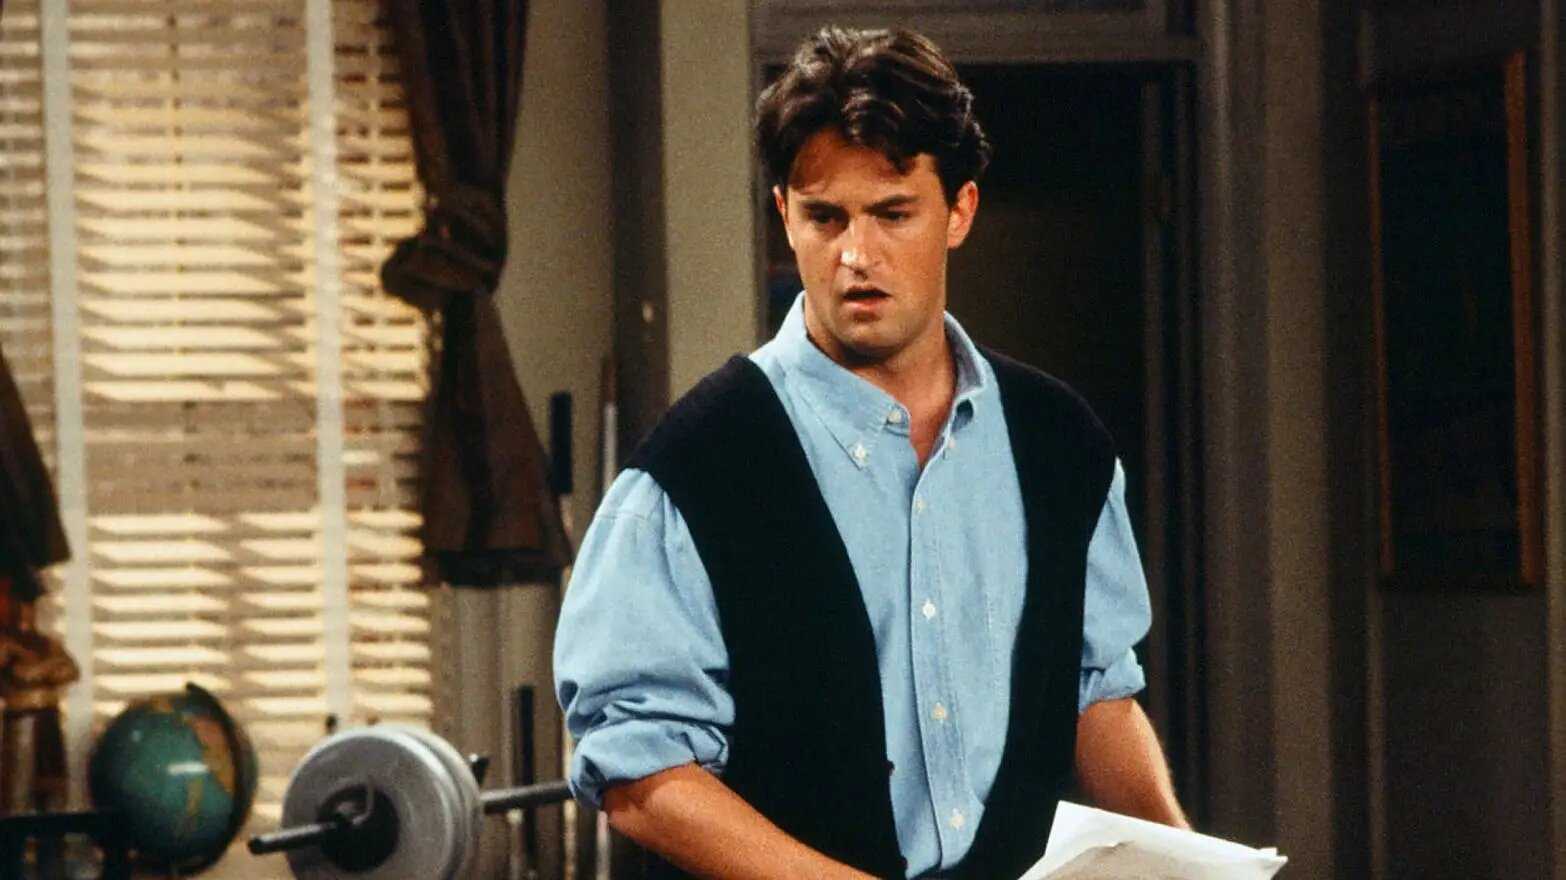 'I felt like I was gonna die if they didn't laugh': Matthew Perry's rollercoaster ride of global sitcom success and rehab